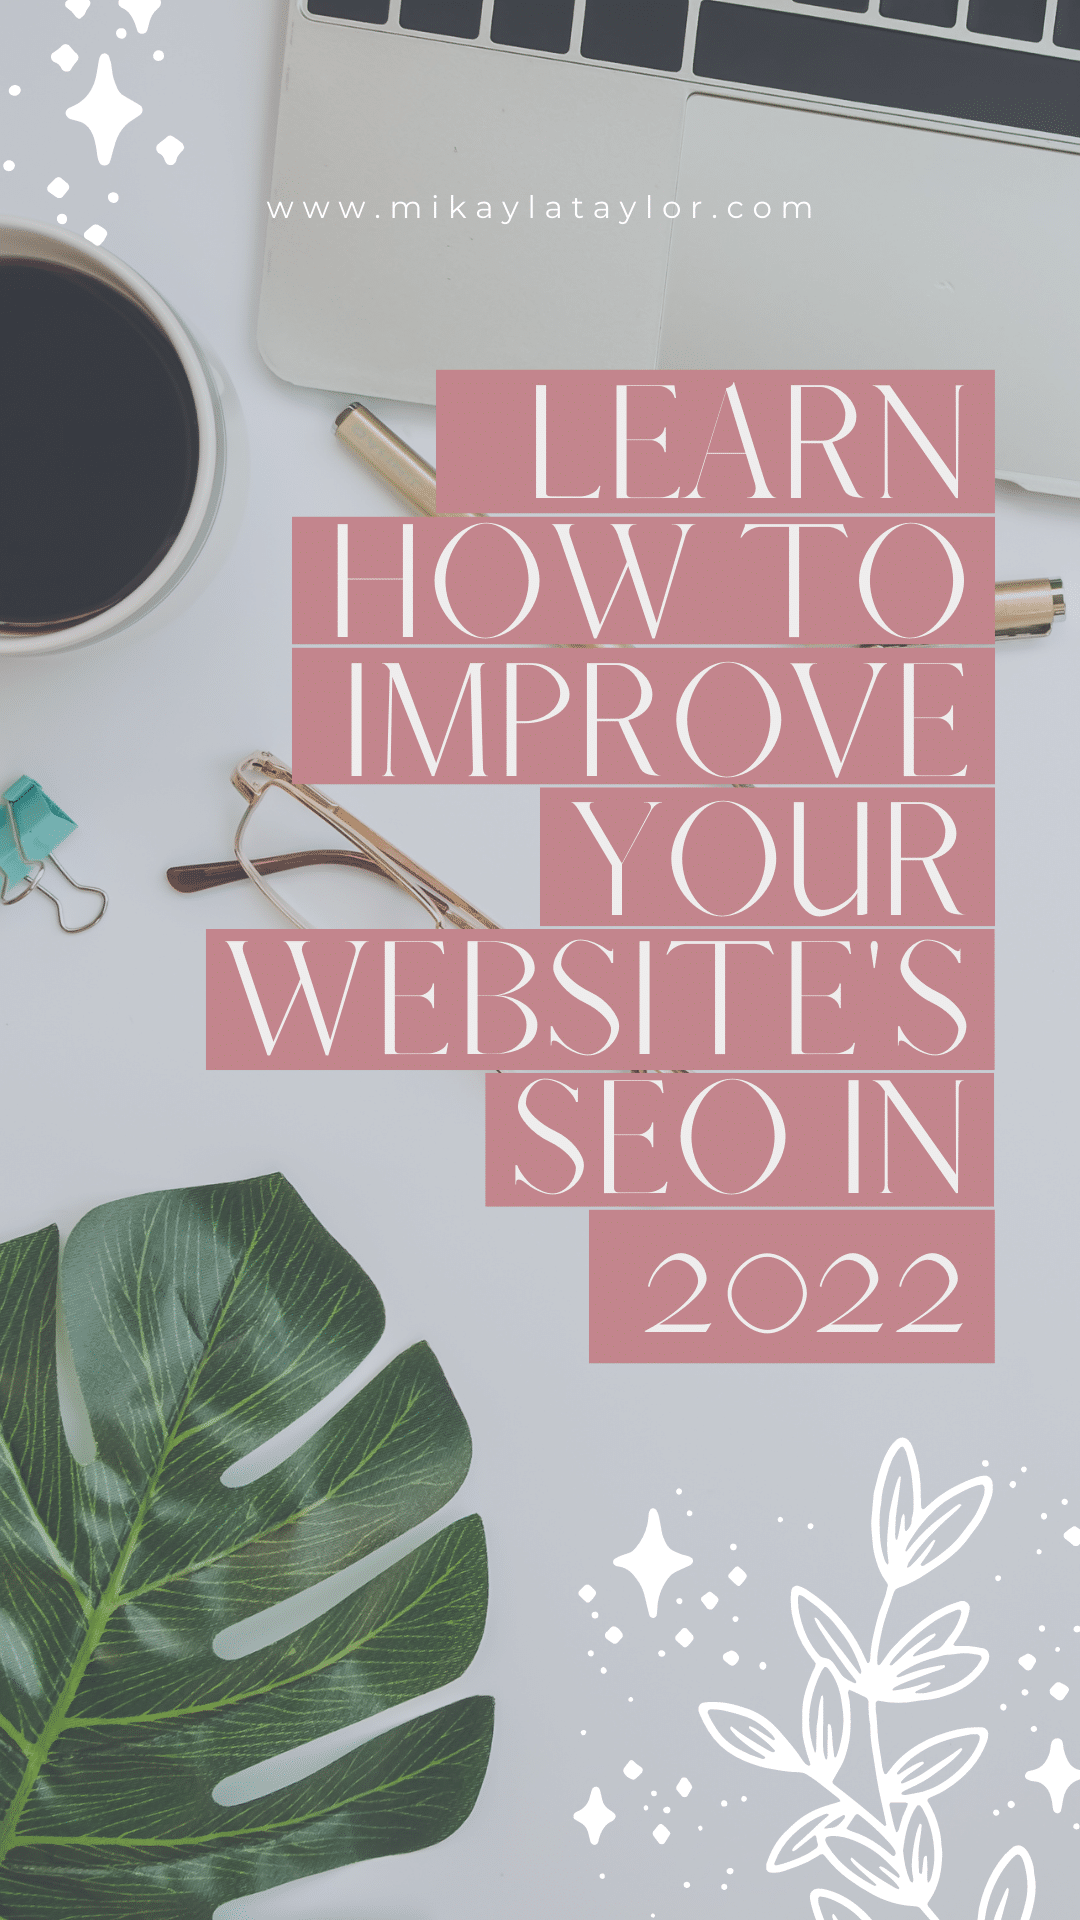 Learn How to Improve Your Website's SEO in 2022 Pinterest1